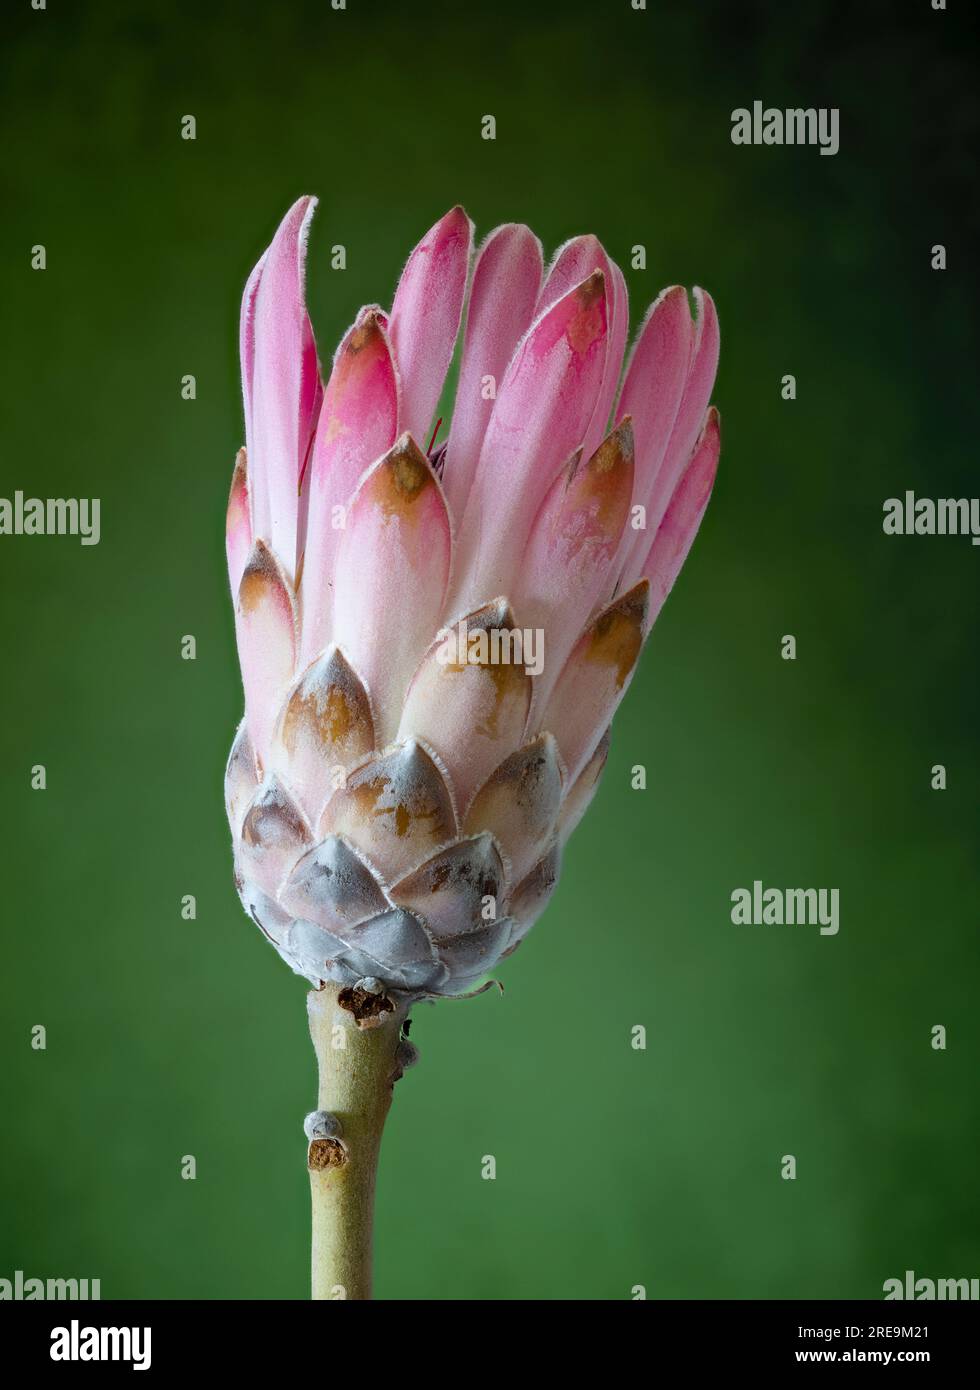 A spectacular and highly unusual flower of a Protea plant, (Protea aristata), photographed against a plain green background Stock Photo